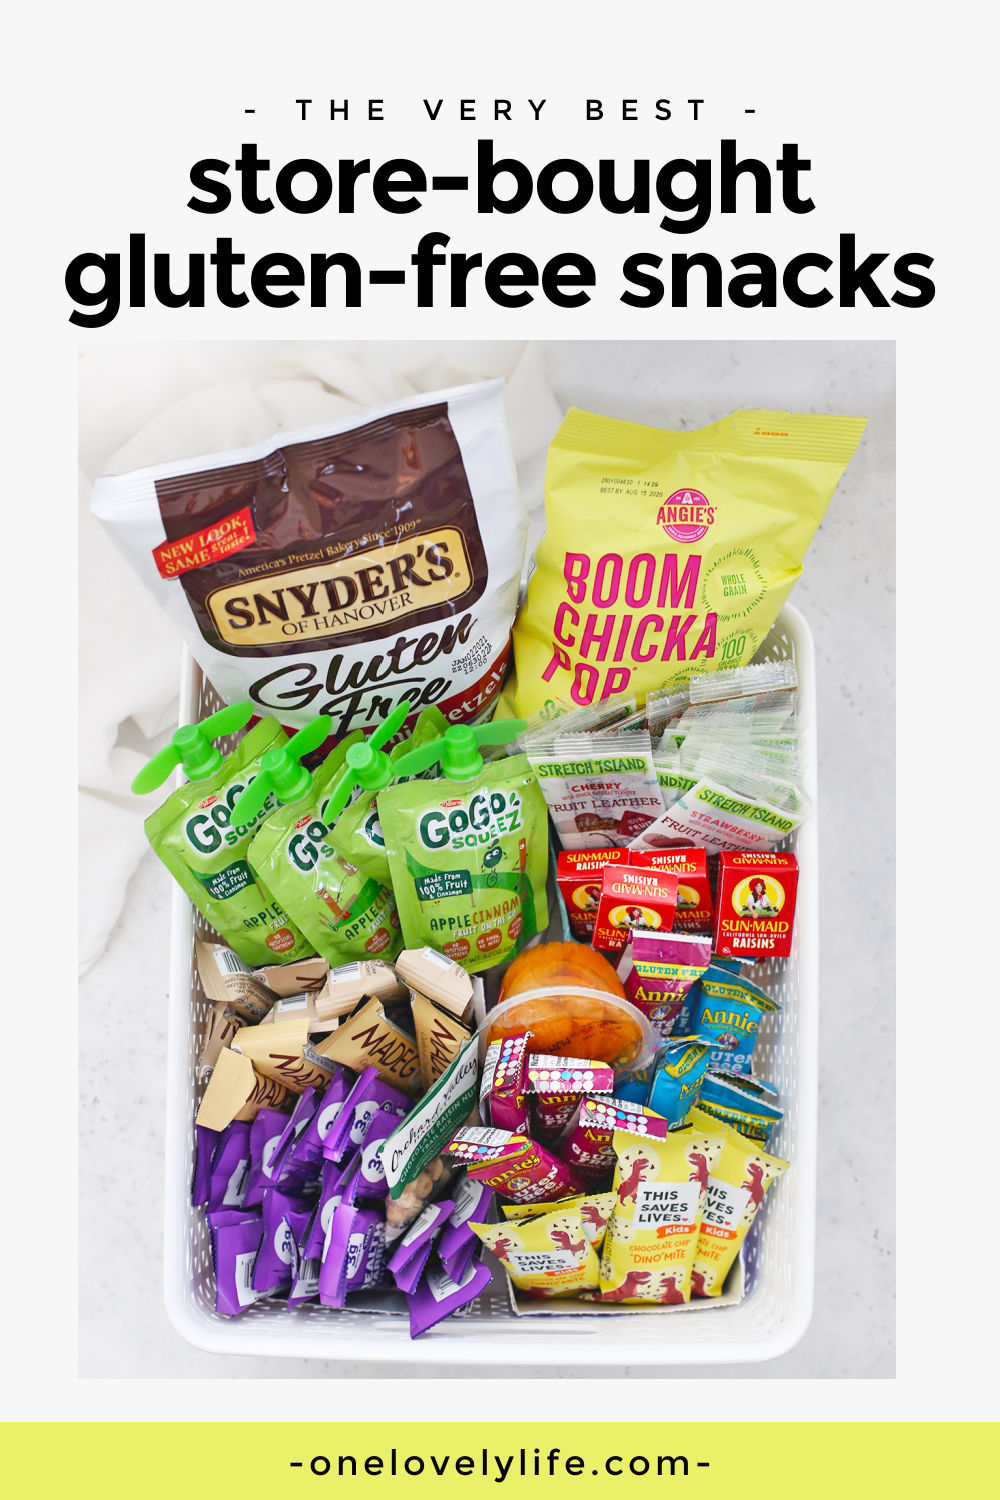 Our Favorite Store-Bought Gluten-Free Snacks For Kids. Easy to buy gluten-free snacks for kids. Perfect for school, travel, taking on the go, or keeping on hand for friends and family! // Gluten-Free Snacks // Gluten-Free Snack Ideas // Gluten-Free School Snacks // Travel Snacks // Kids Snacks // healthy kids snacks // gluten free snack ideas // gluten free snacks for school